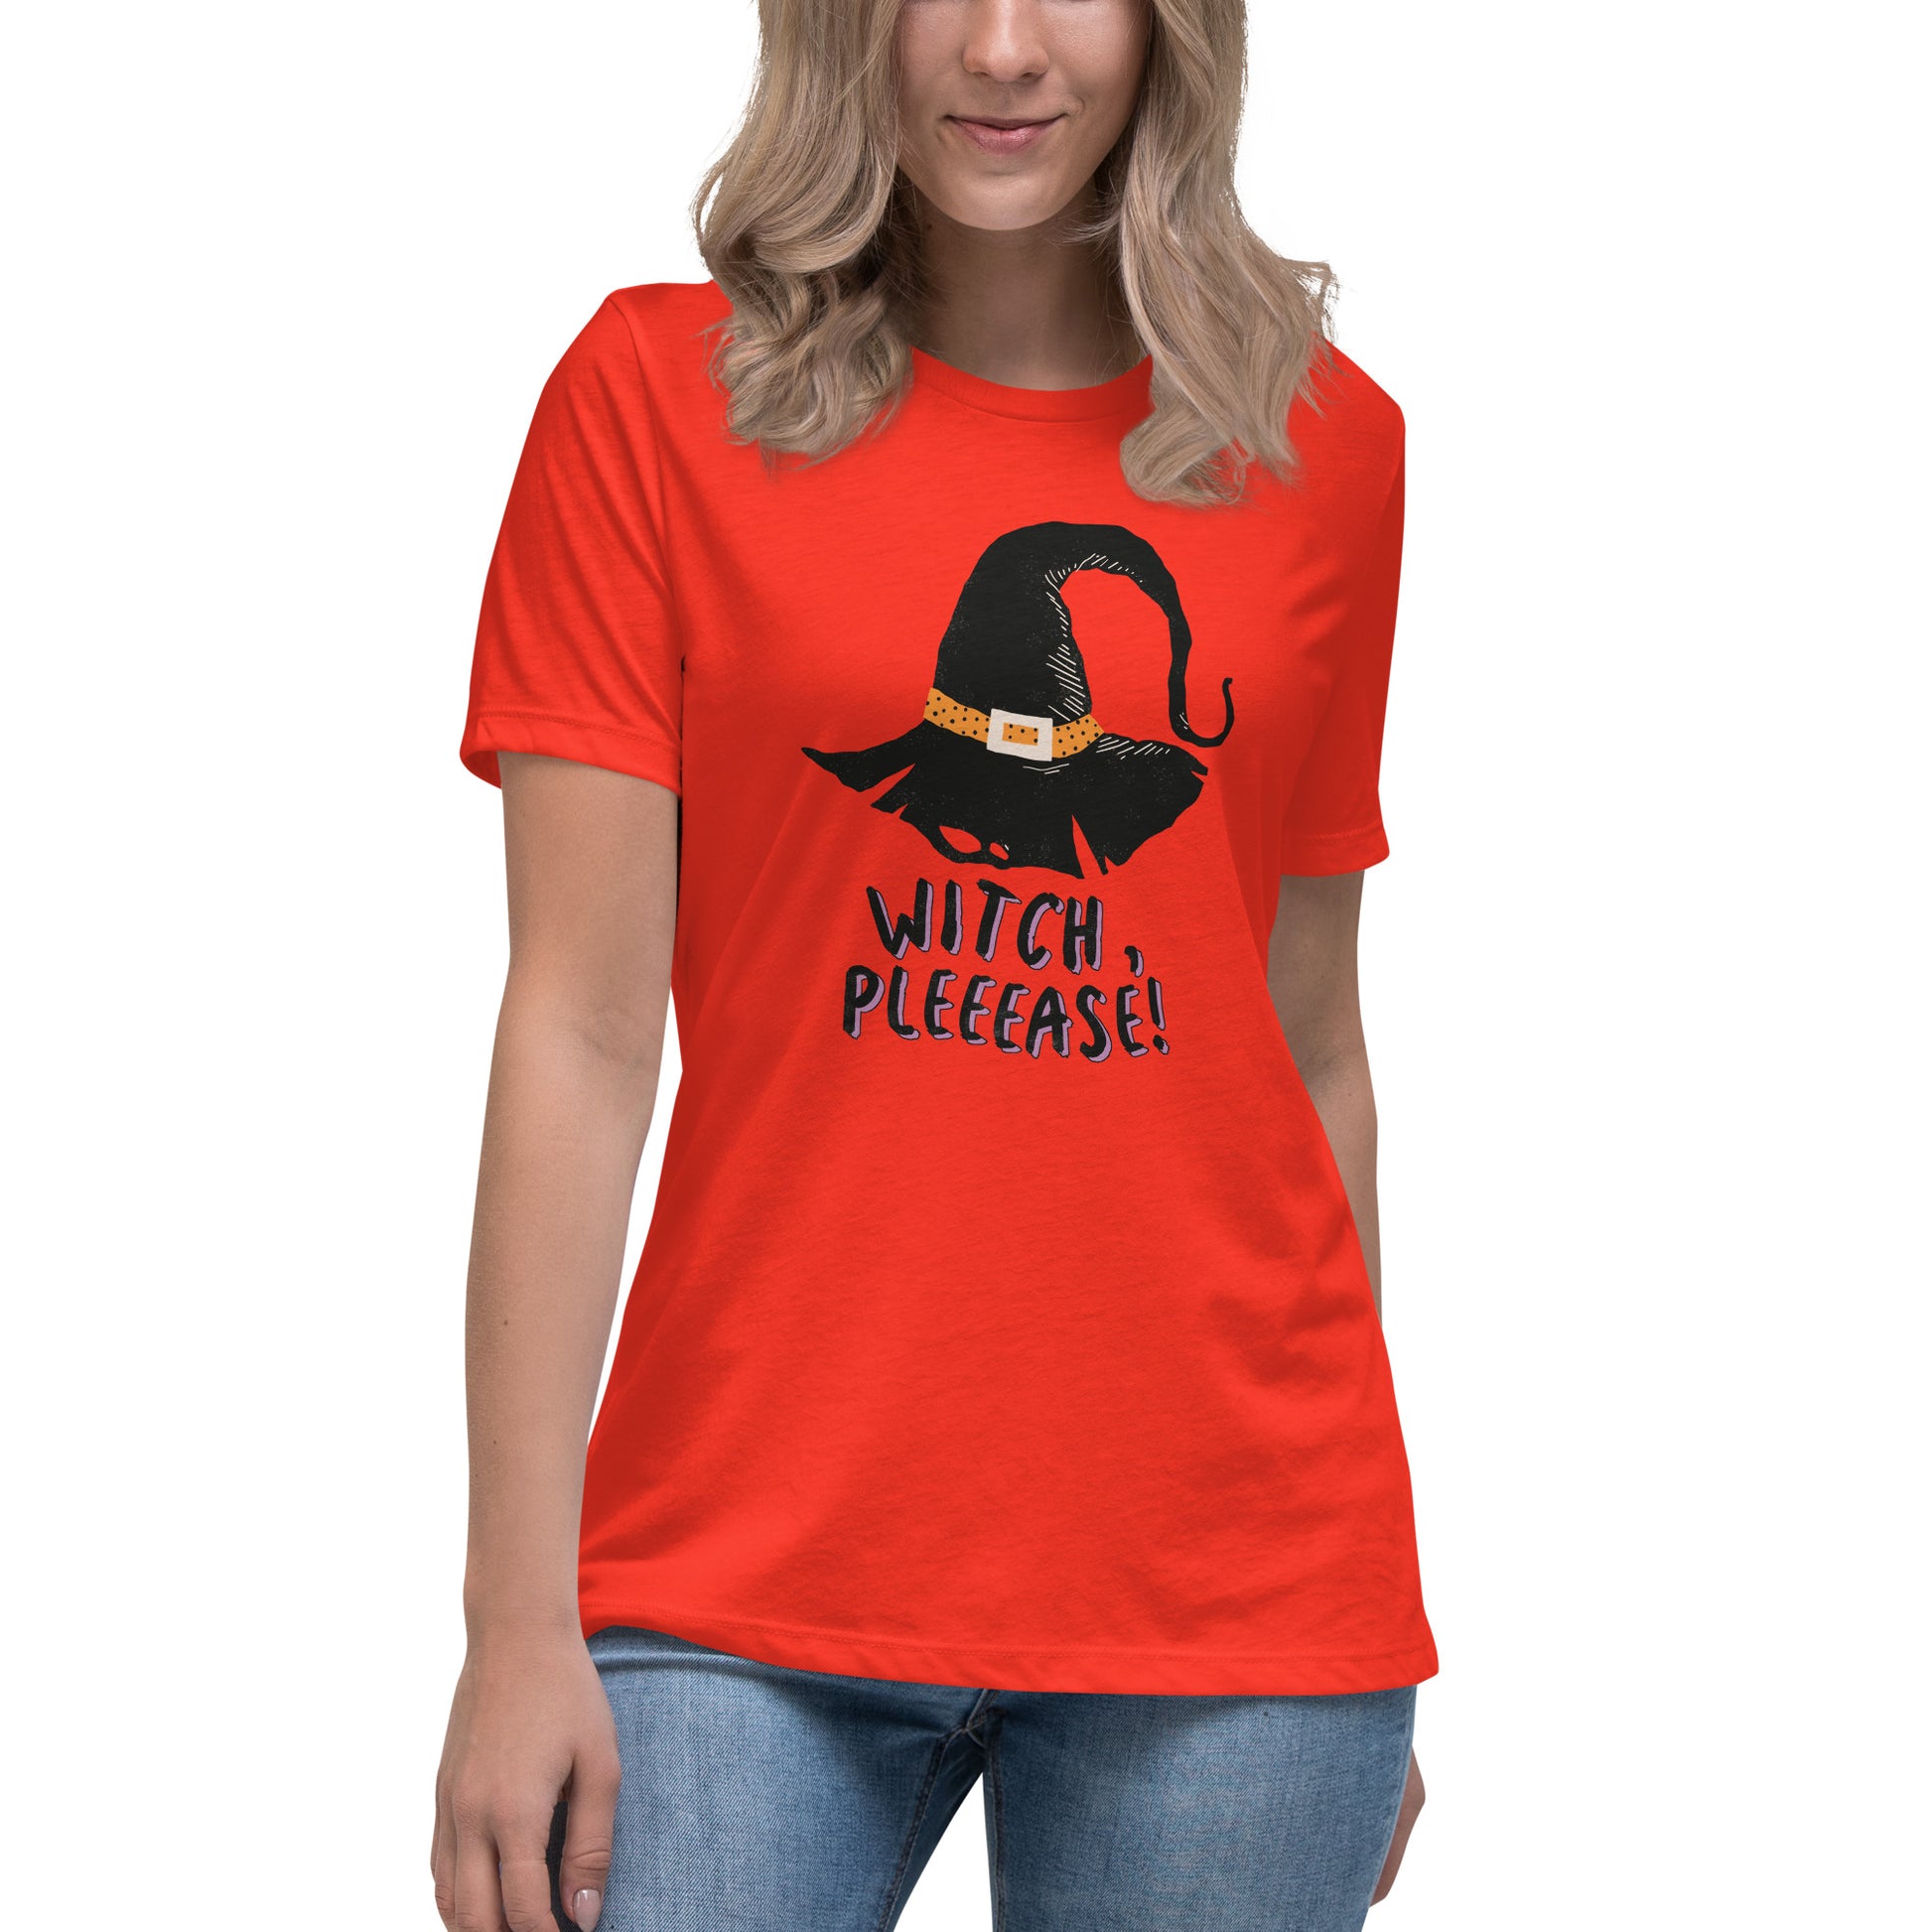 Witch Please! Women's Relaxed T-Shirt Tee Tshirt